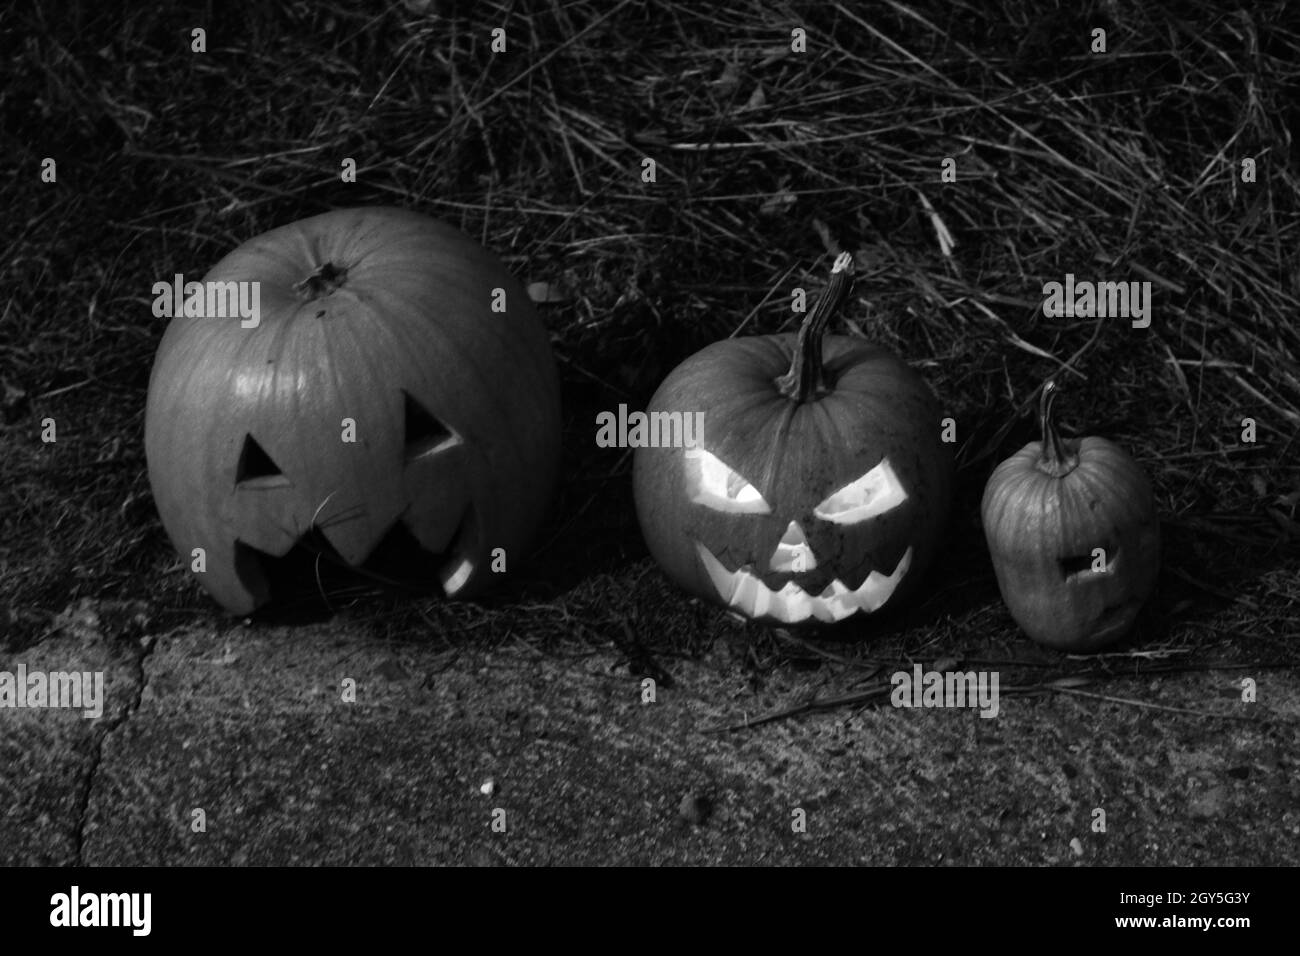 Closeup grayscale of  decorative pumpkins for Halloween on the floor Stock Photo